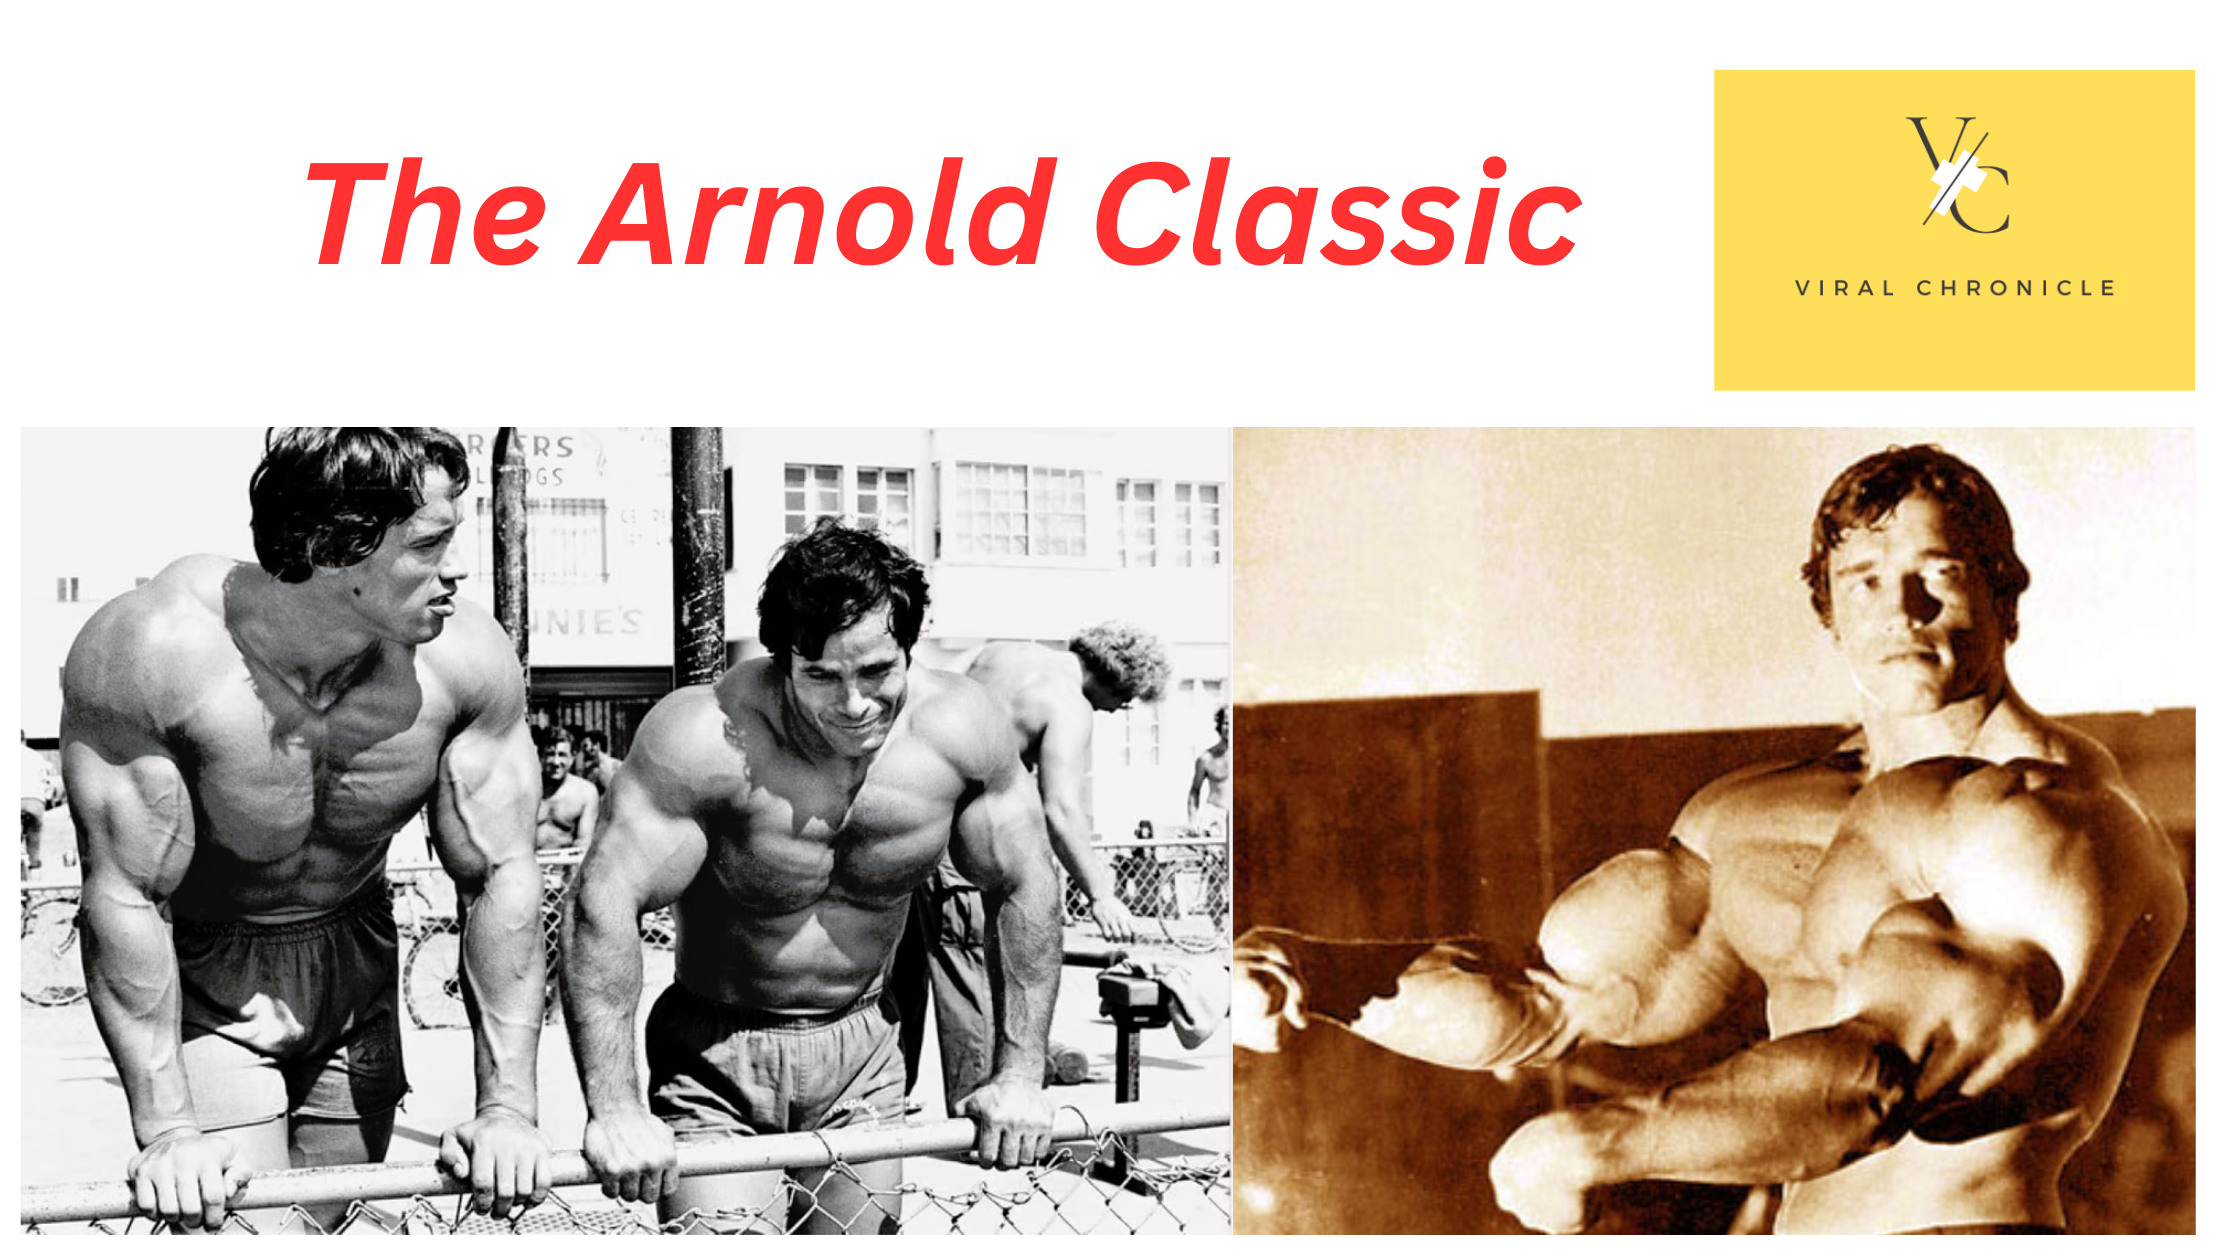 The Arnold Classic